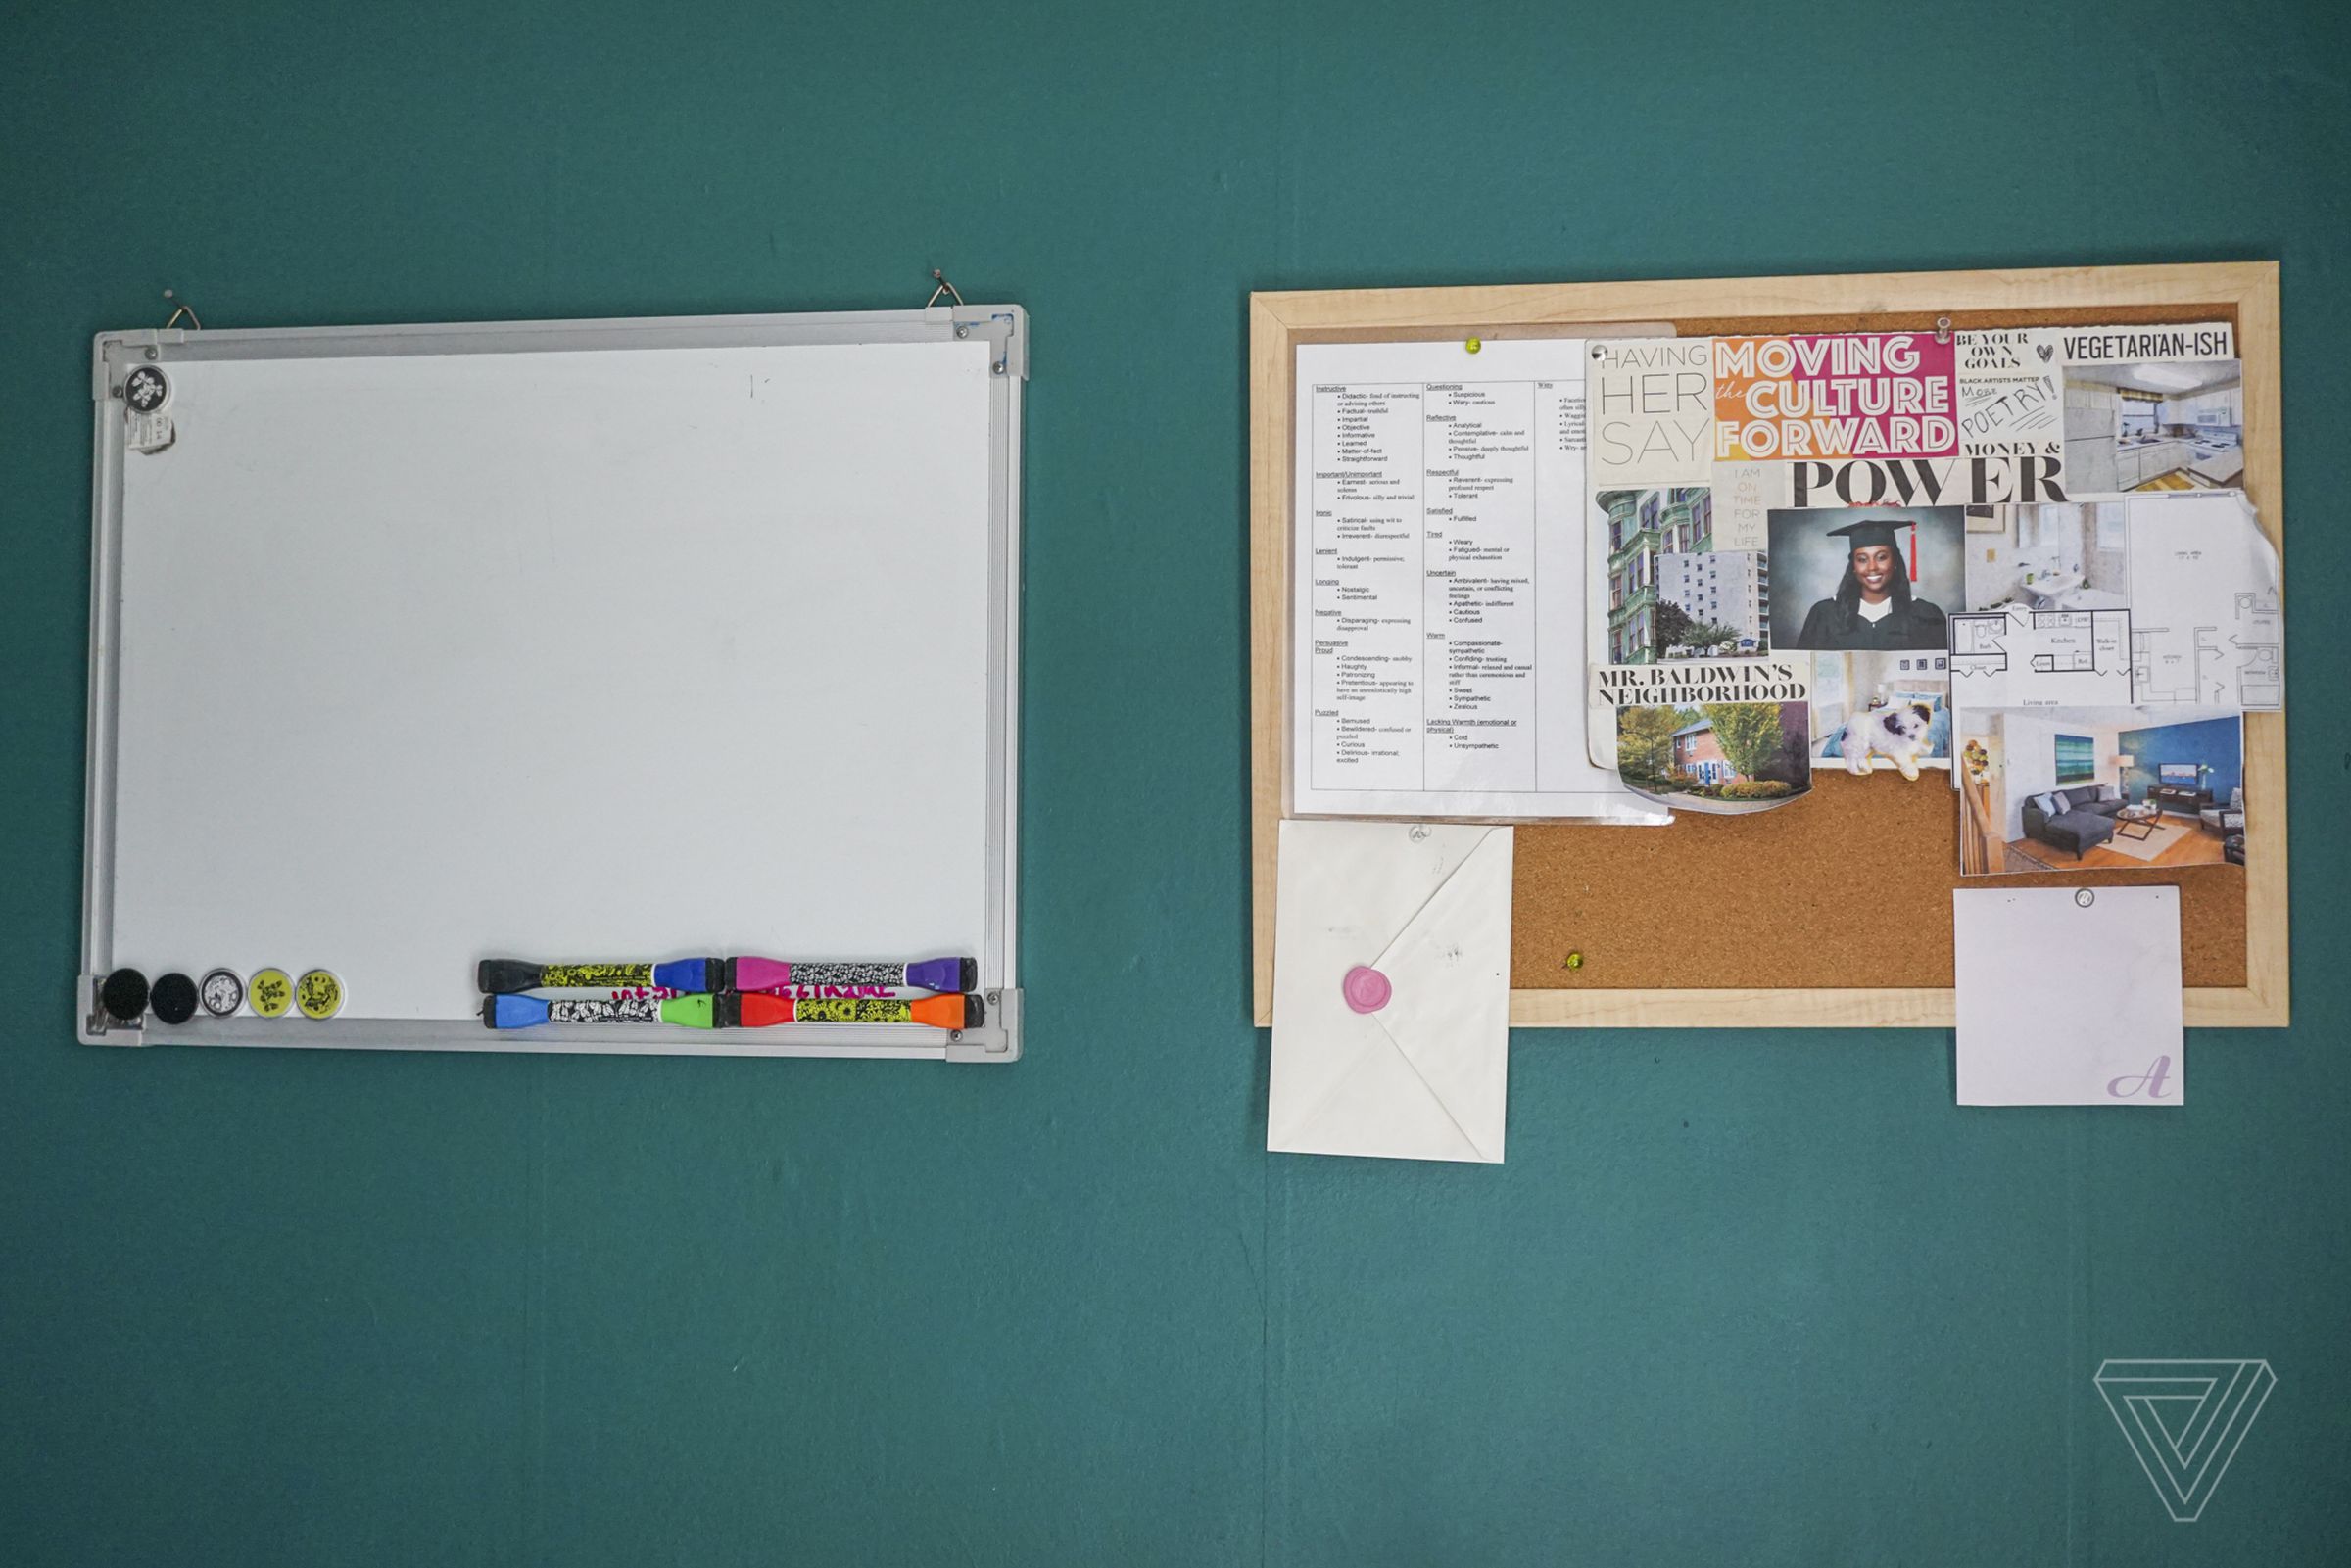 Keeping up to date with a corkboard and whiteboard.